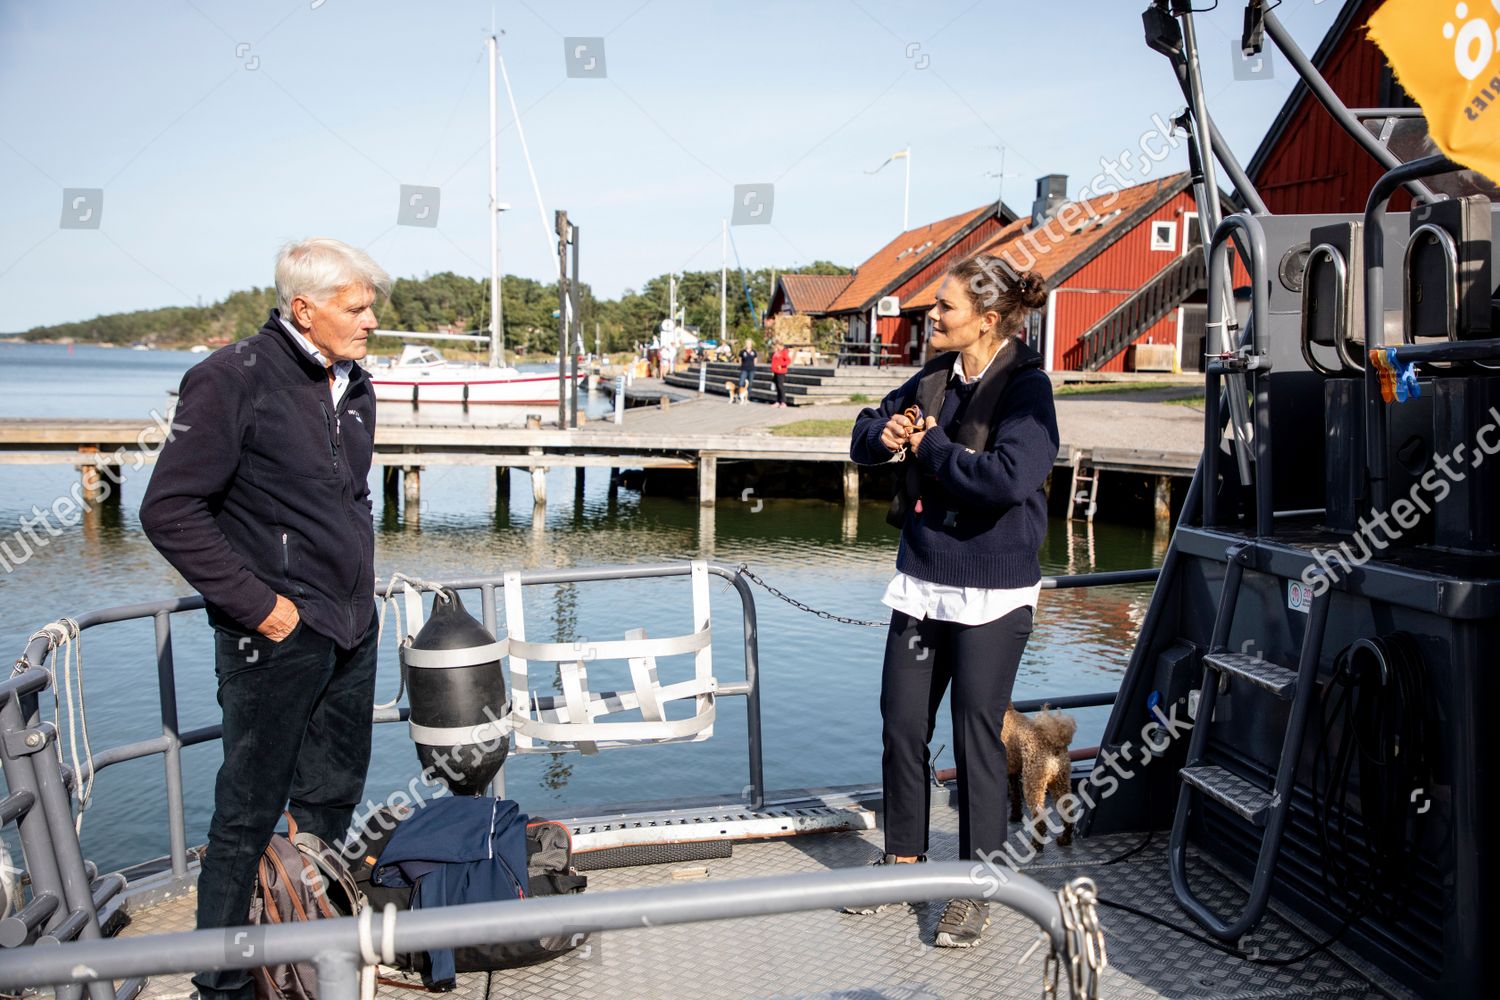 crown-princess-victoria-and-her-dog-rio-visit-alo-and-uto-sweden-shutterstock-editorial-12361980ax.jpg